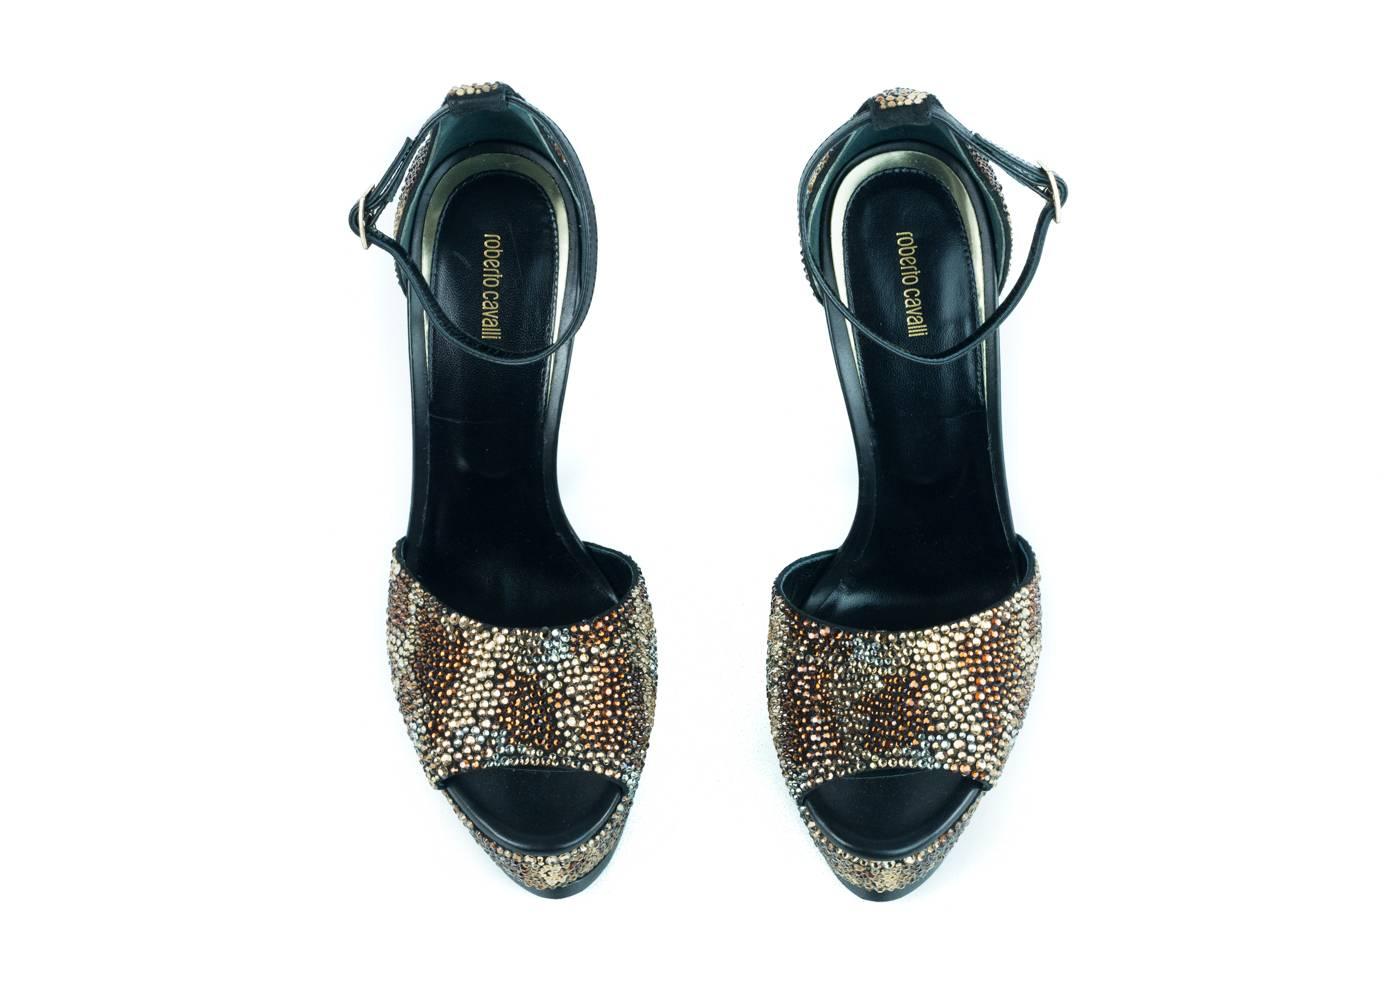 Brand New Roberto Cavalli Platforms
Original Box & Dust Bag Included
Retails in Stores & Online for $2560
Size E38 / US8 Fits True to Size

Stunning Roberto Cavalli platform sandals encrusted with Swarovski Crystals throughout the entire pump. The